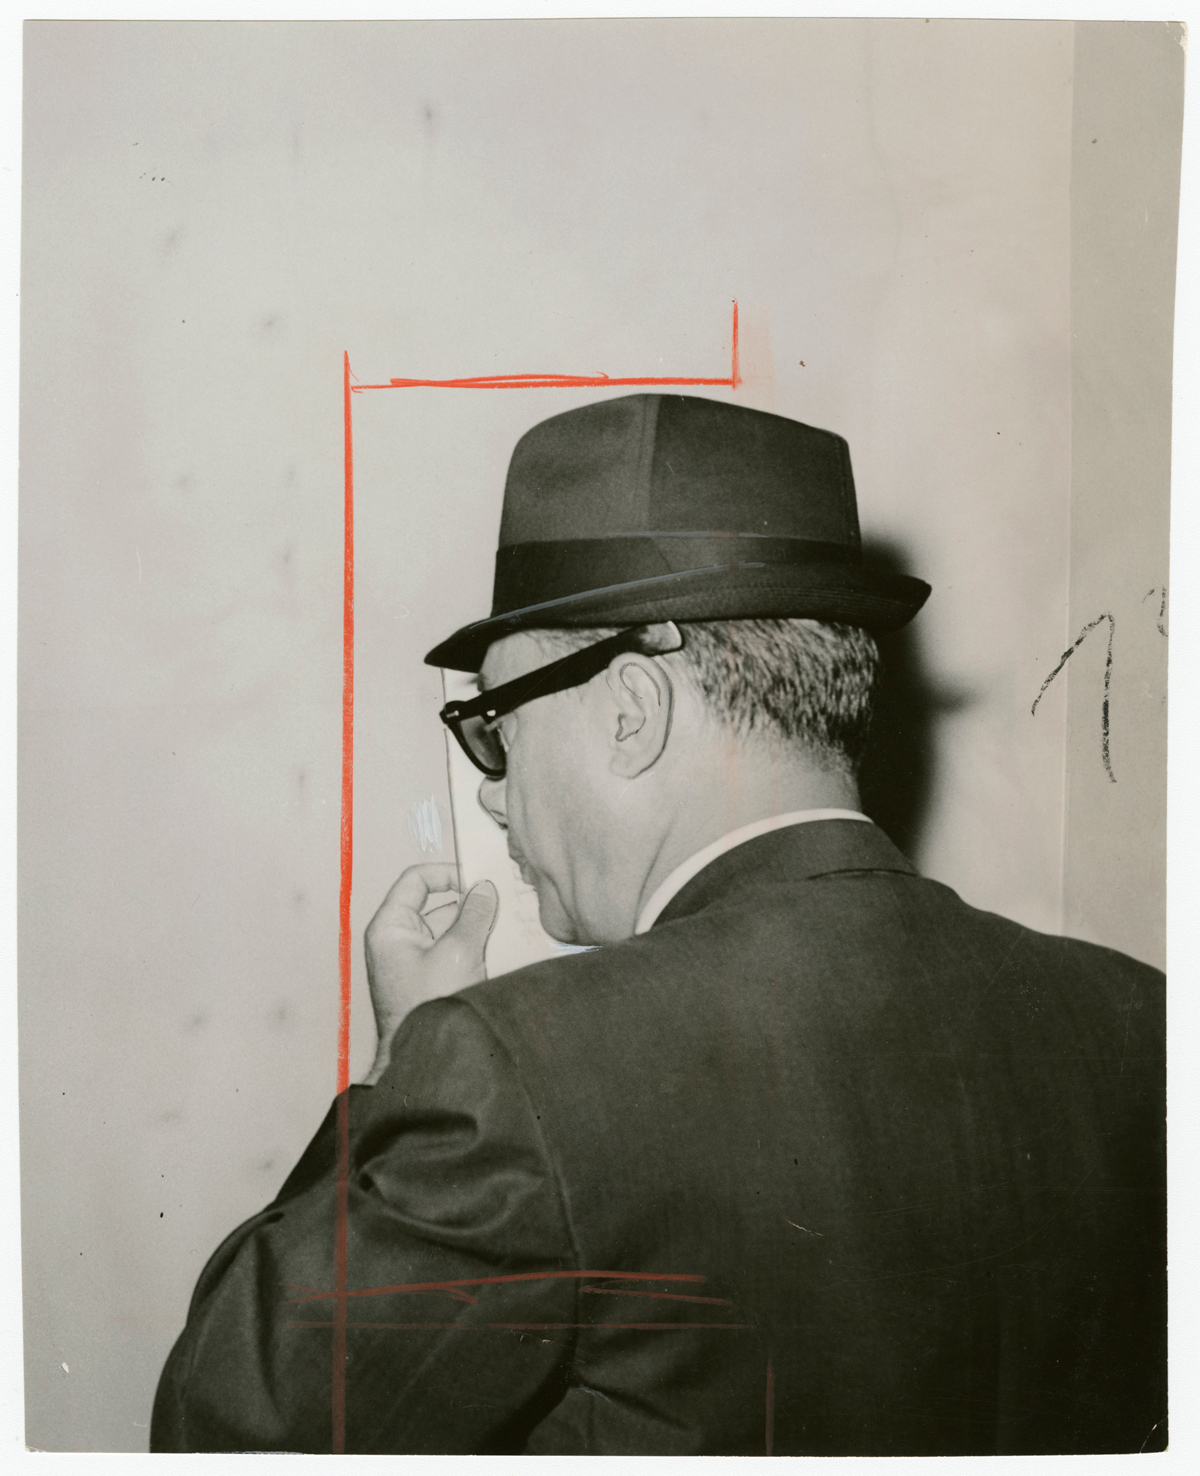     Unidentified Photographer, Max Bluestein, Toronto Gambler, 1947, Gelatin silver print, 9 x 7&#8243;. Gift of The Globe and Mail newspaper to the Canadian Photography Institute of the National Gallery of Canada.

